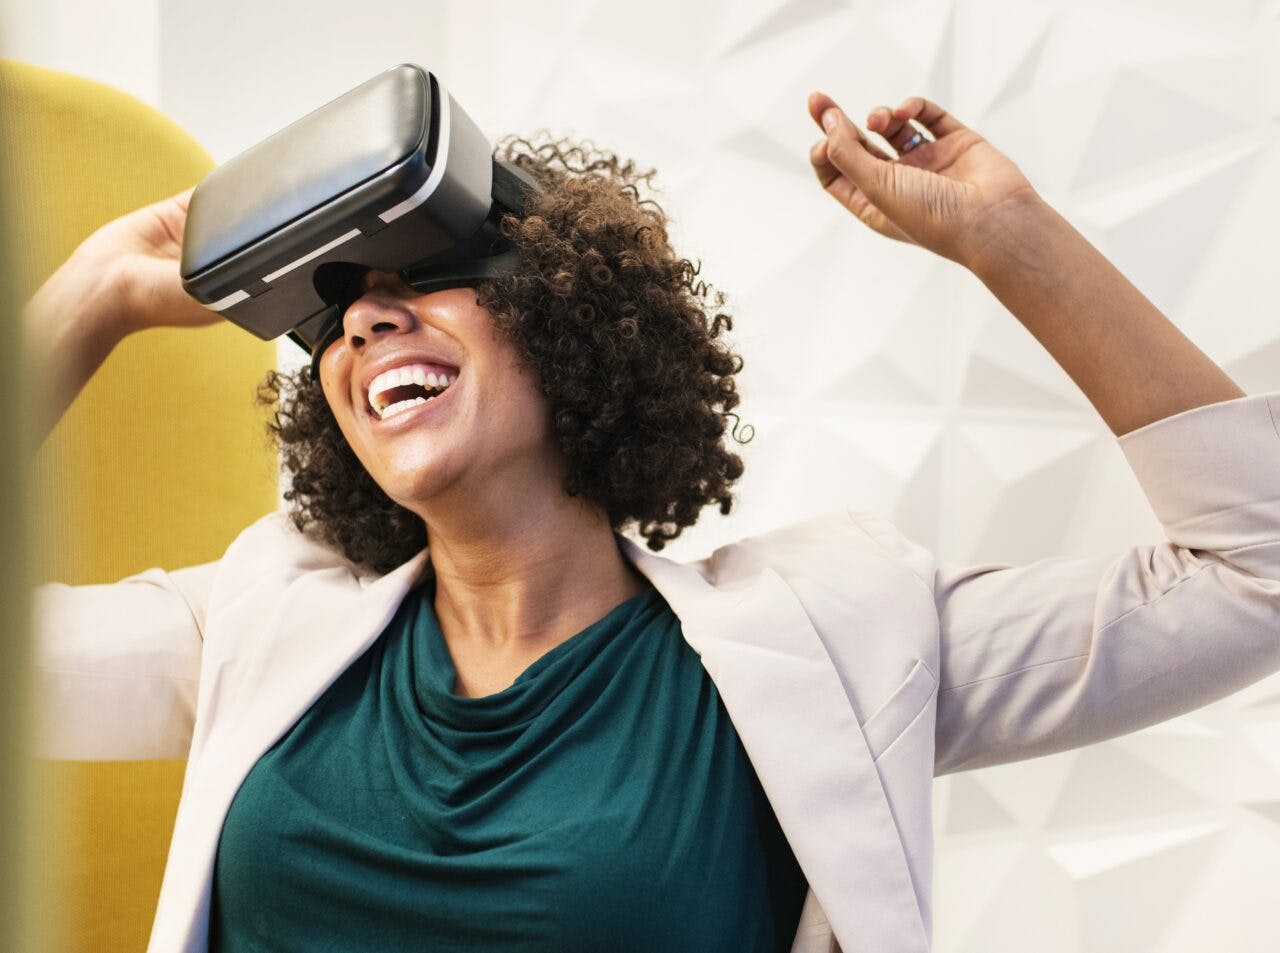 Neuer Trend: Was sind Virtual Reality Parties?